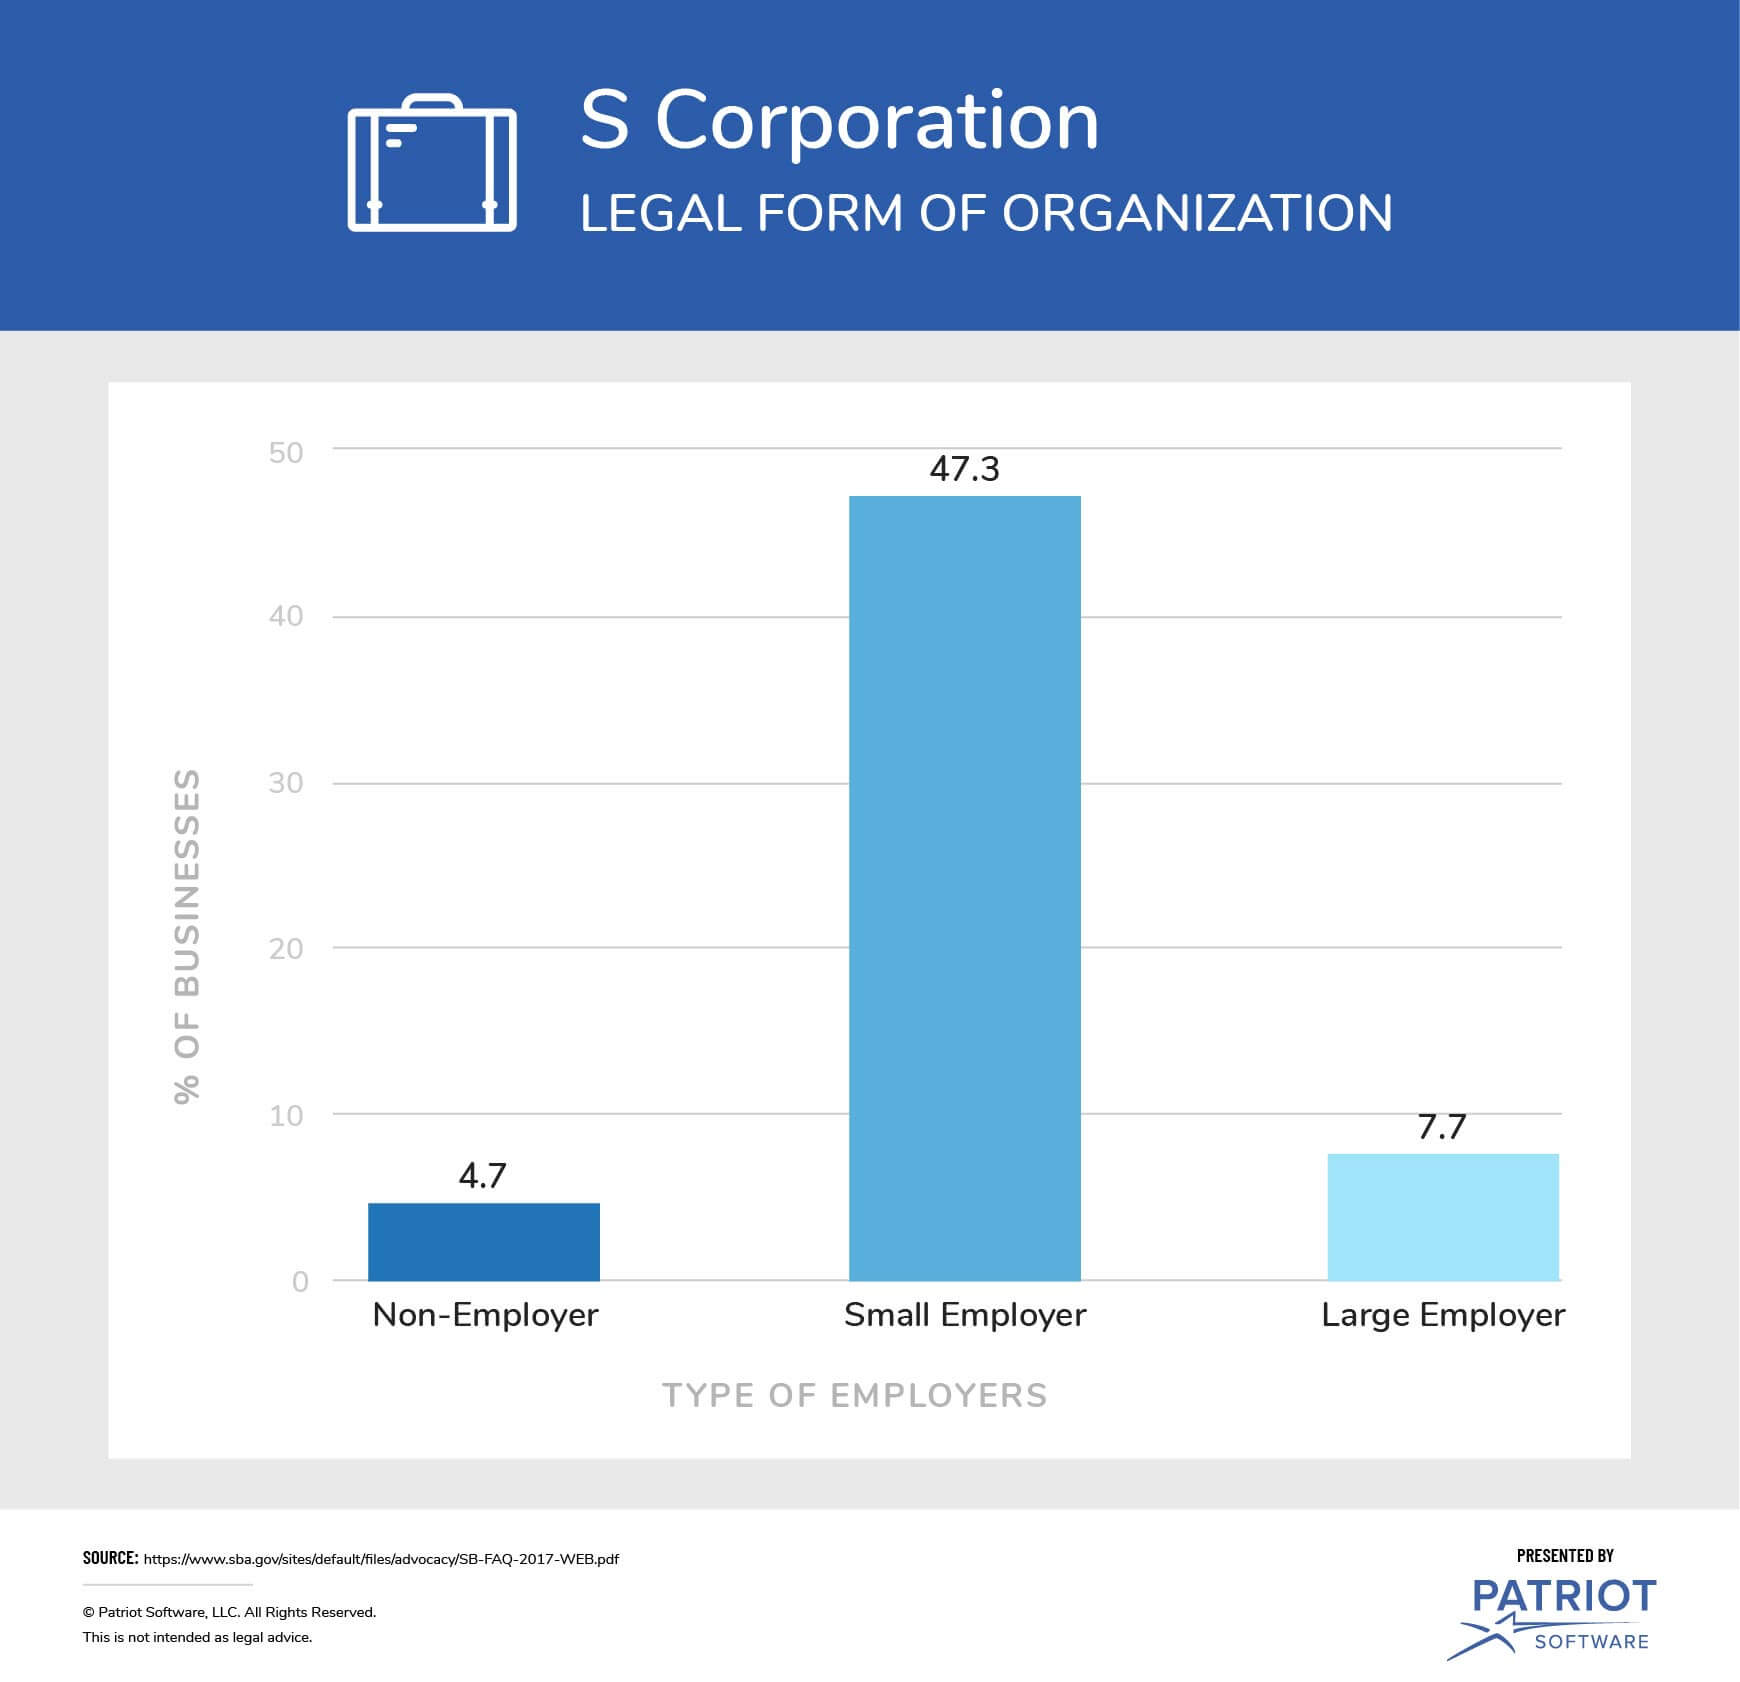 What Is an S Corporation?